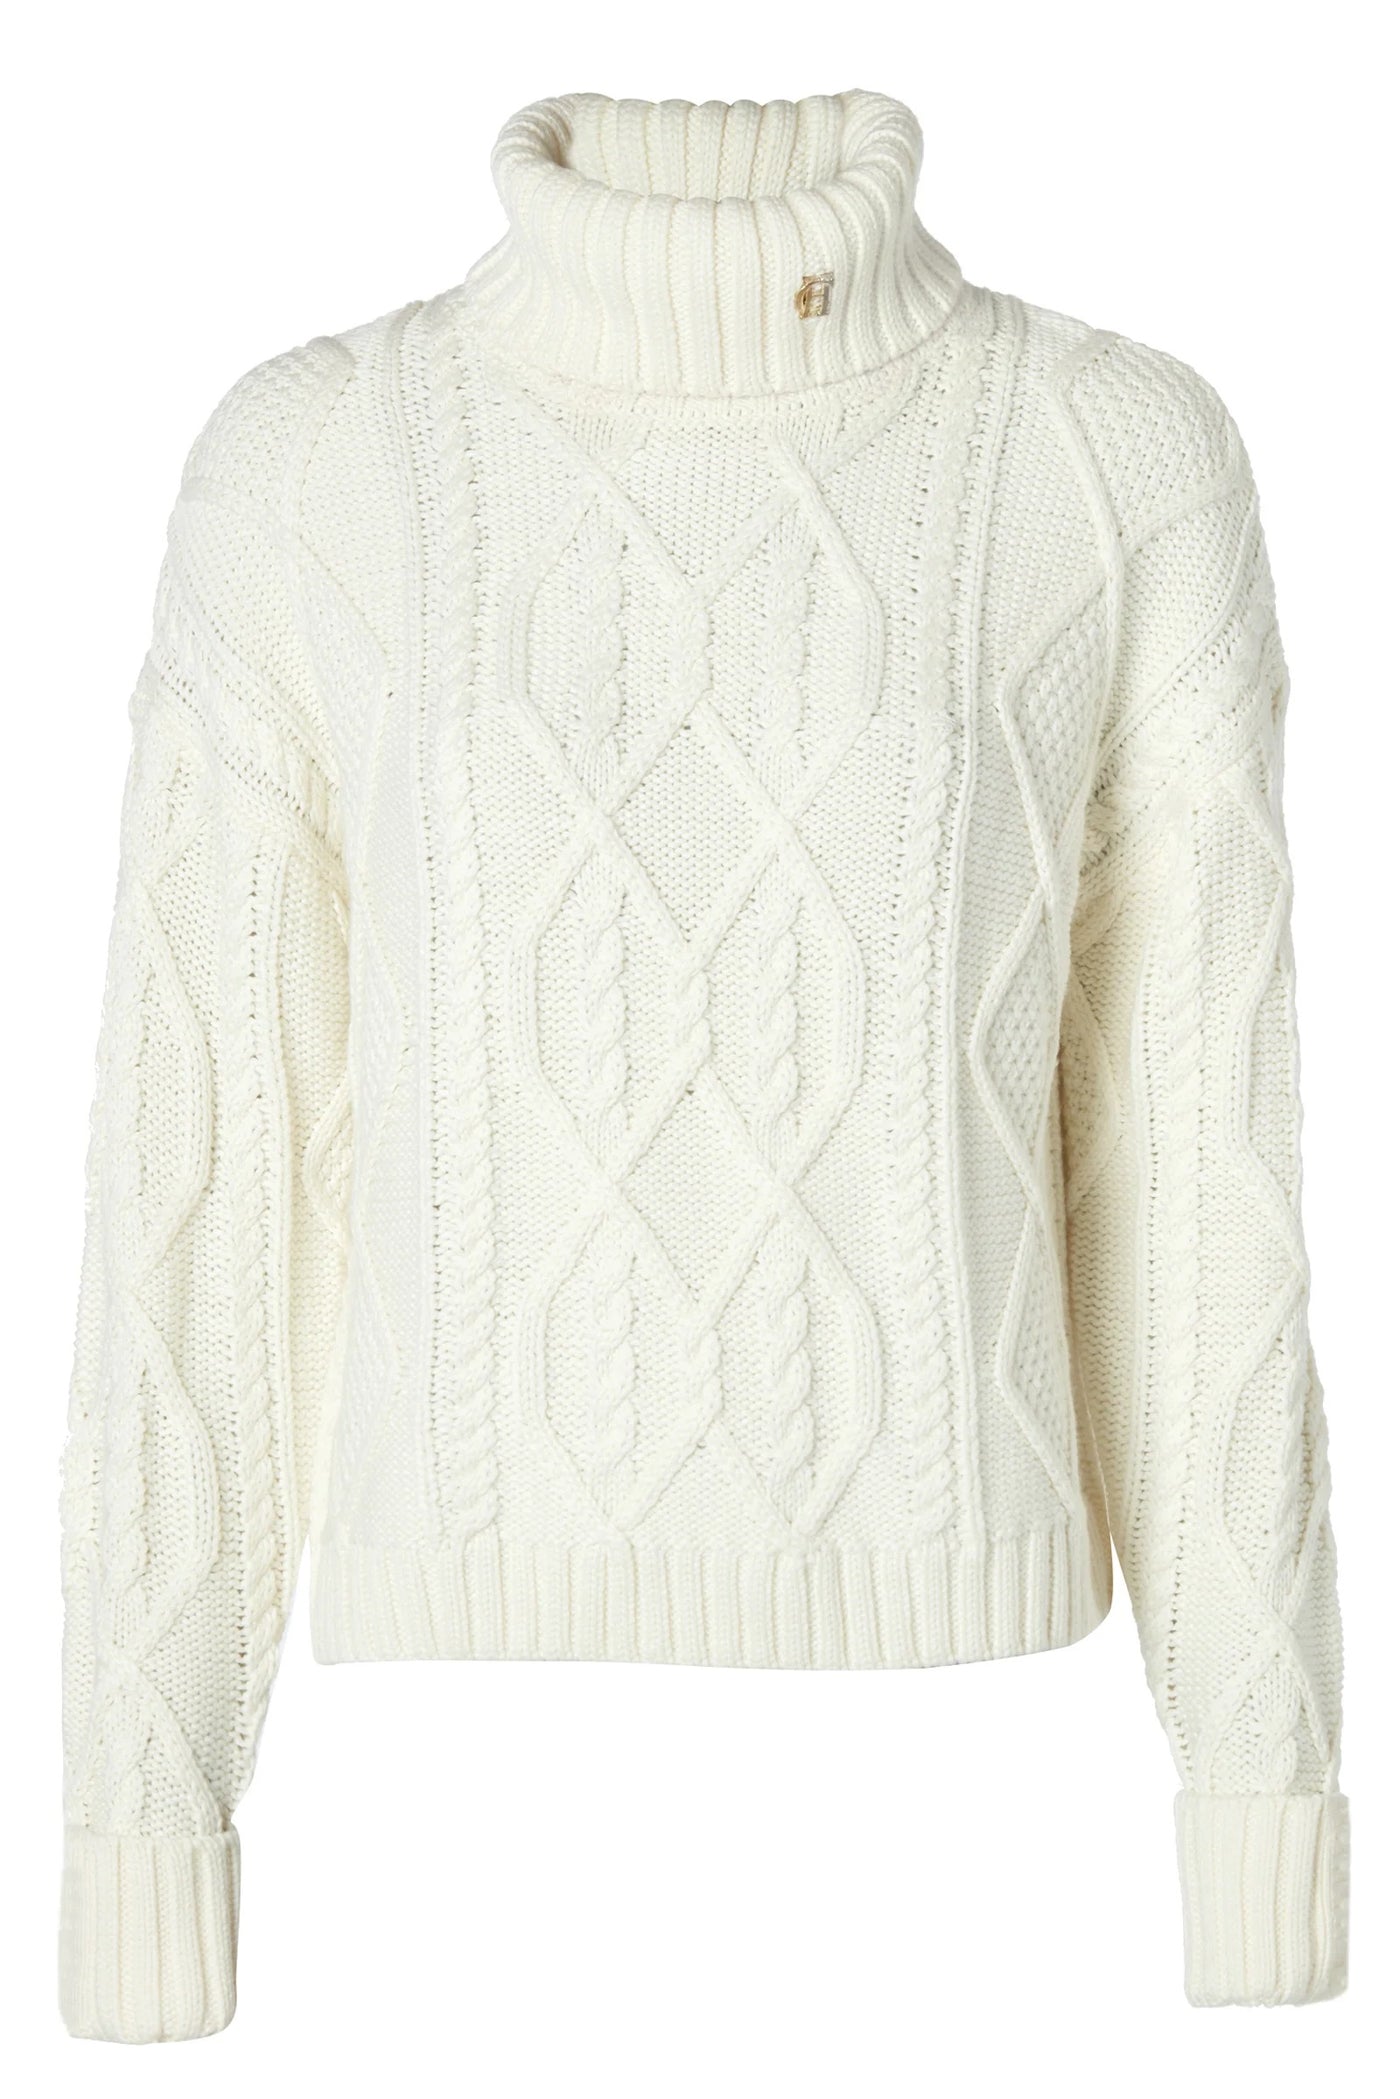 Holland Cooper Noveli Cable Knit in Natural Front